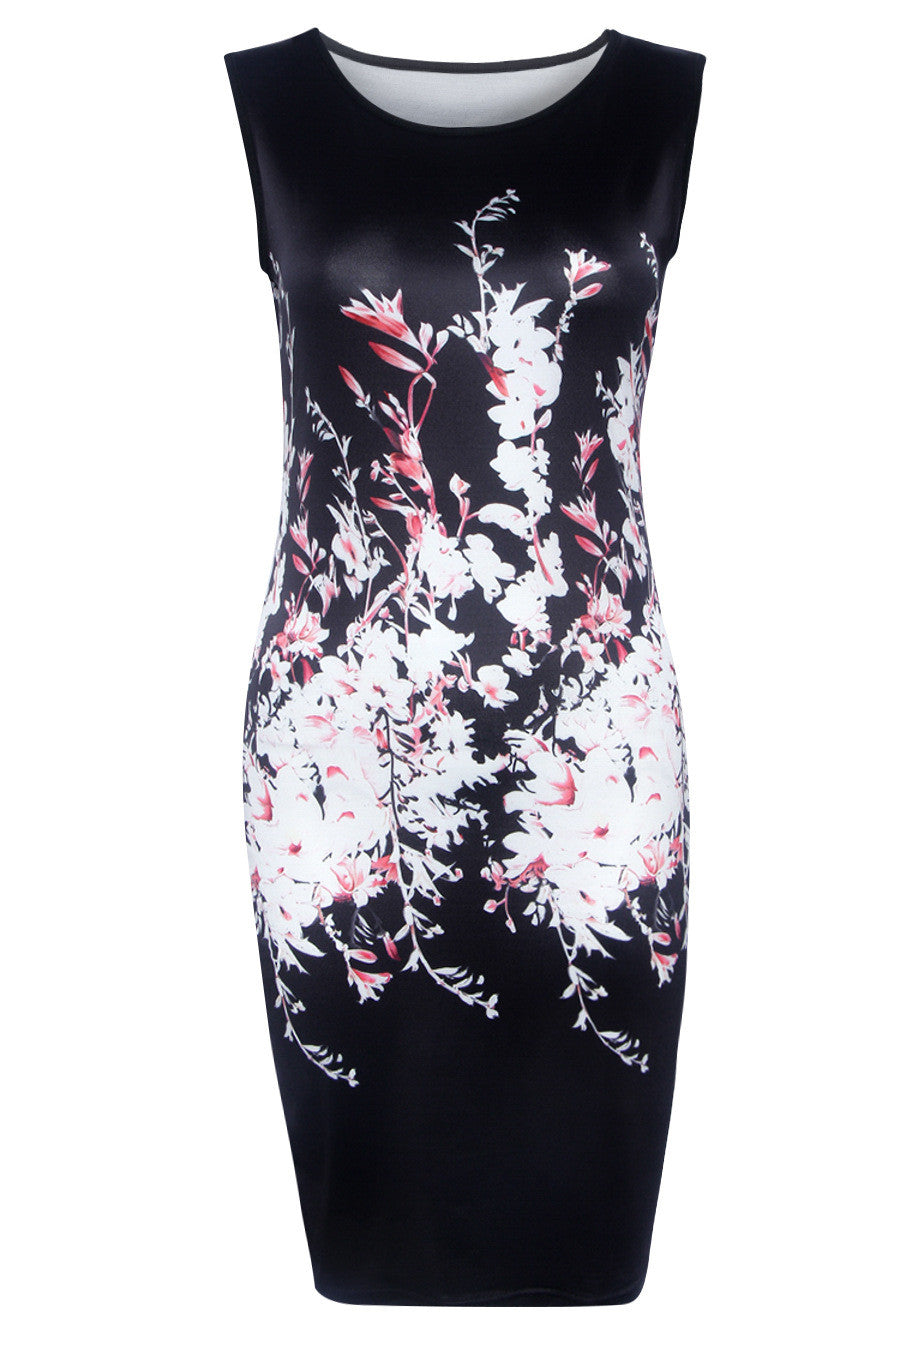 Black Sleeveless Floral Print Bodycon Knee-Length Dress - Oh Yours Fashion - 8